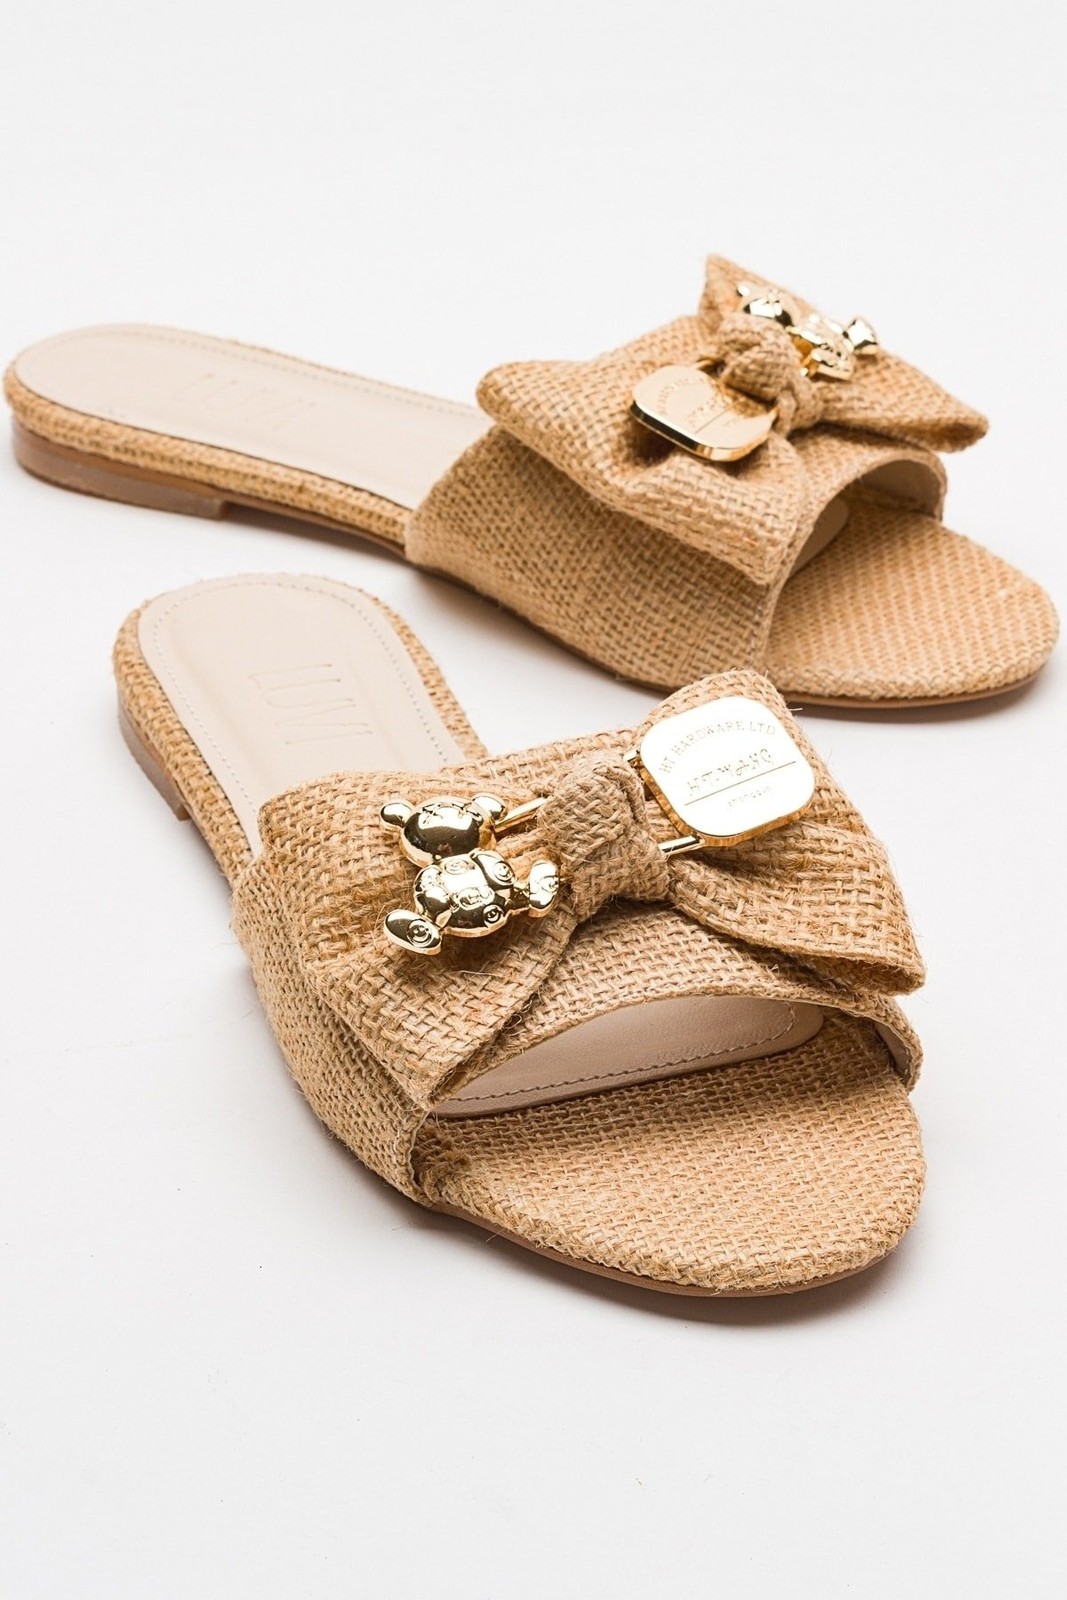 LuviShoes SPEA Beige Women's Slippers with Straw Buckles.